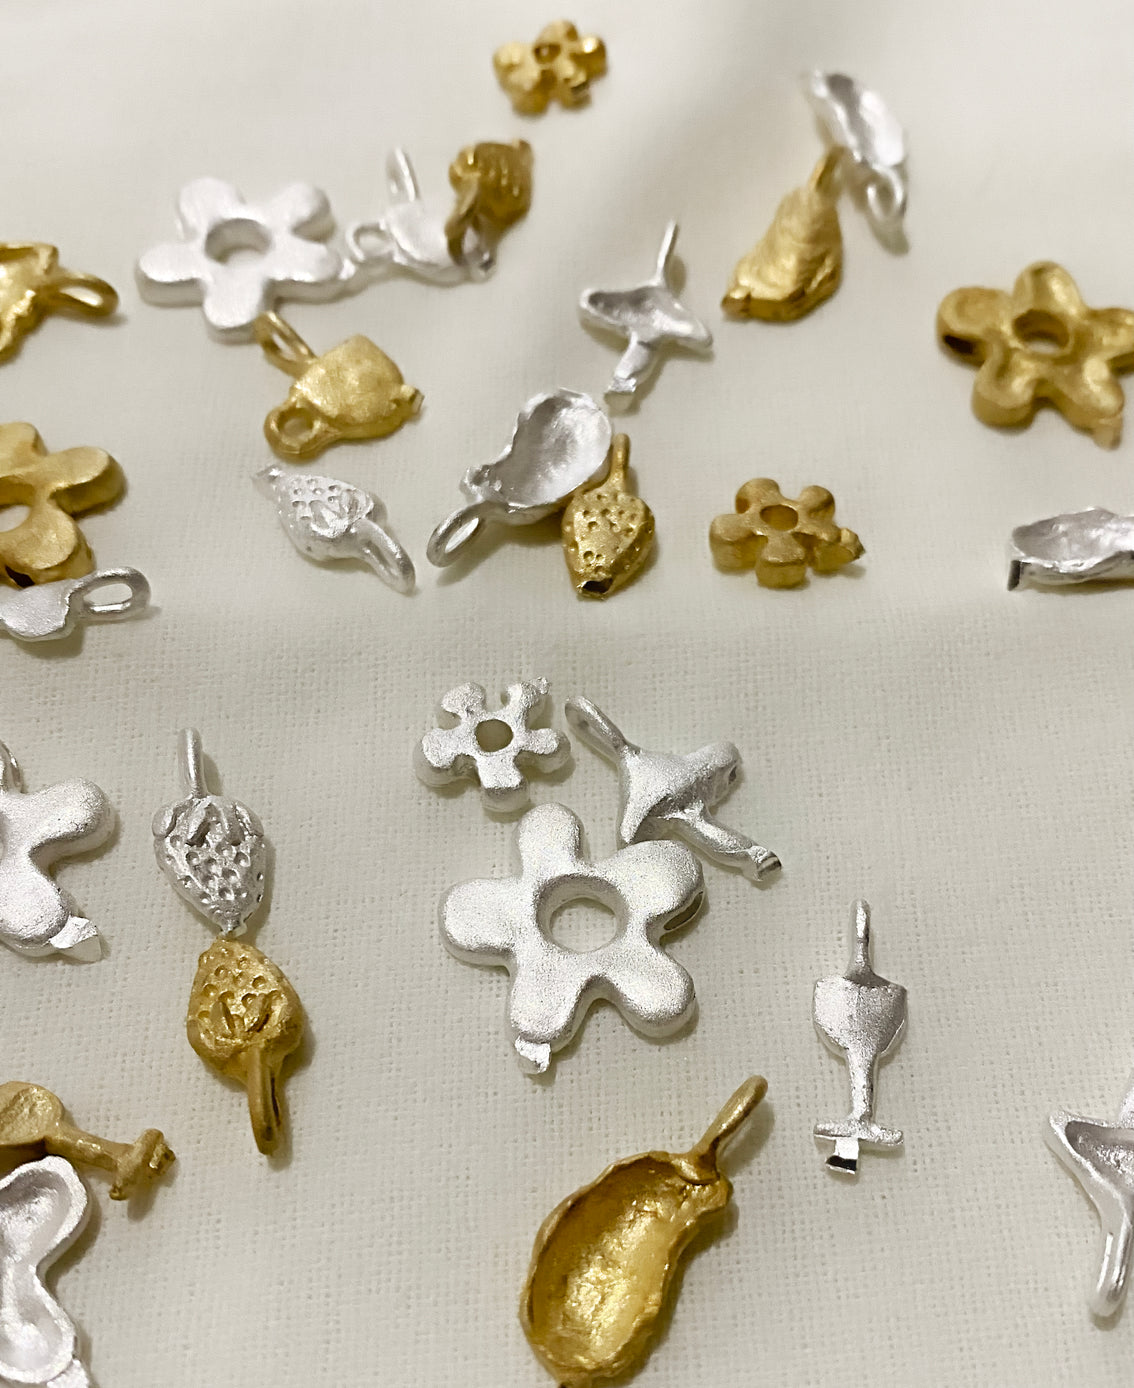 Raw silver and gold charm castings of mushrooms, flowers, and shells